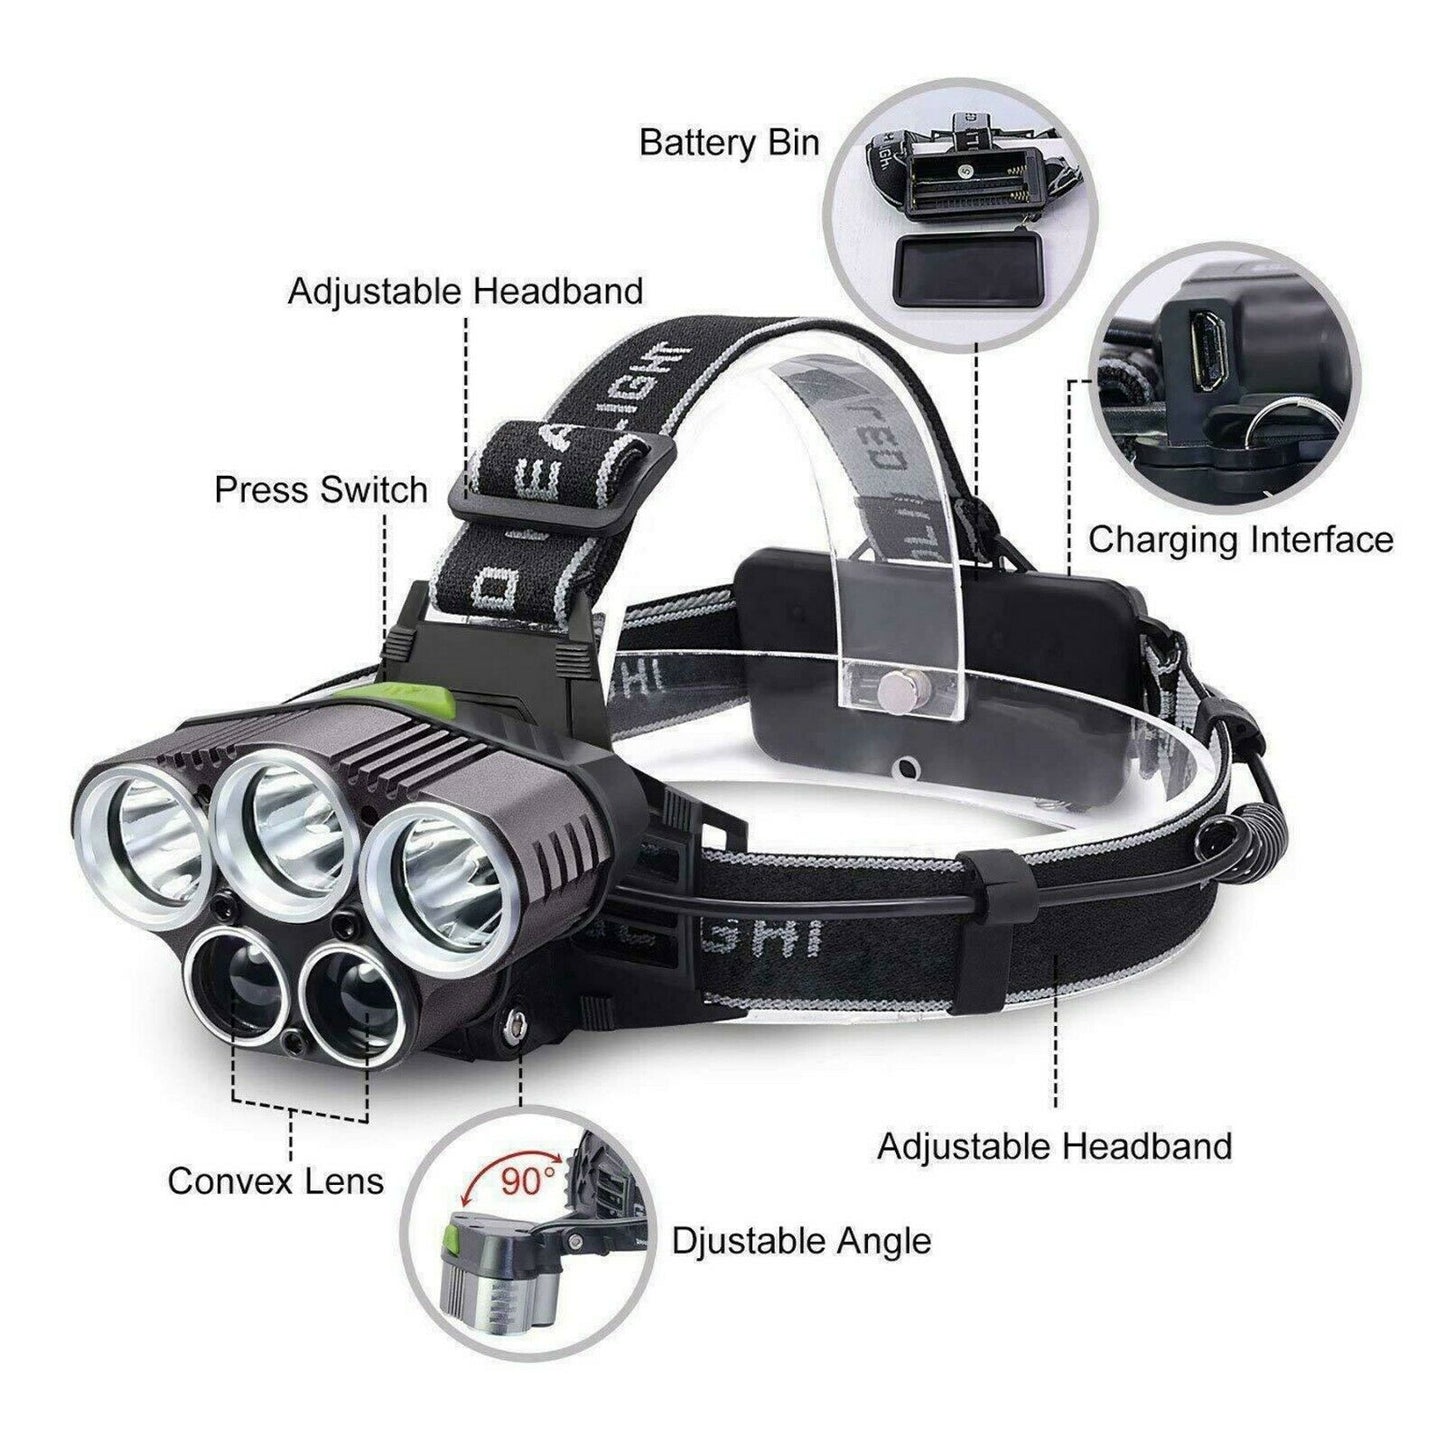 250000LM 5X T6 LED Headlamp Rechargeable Head Light Flashlight Torch Lamp